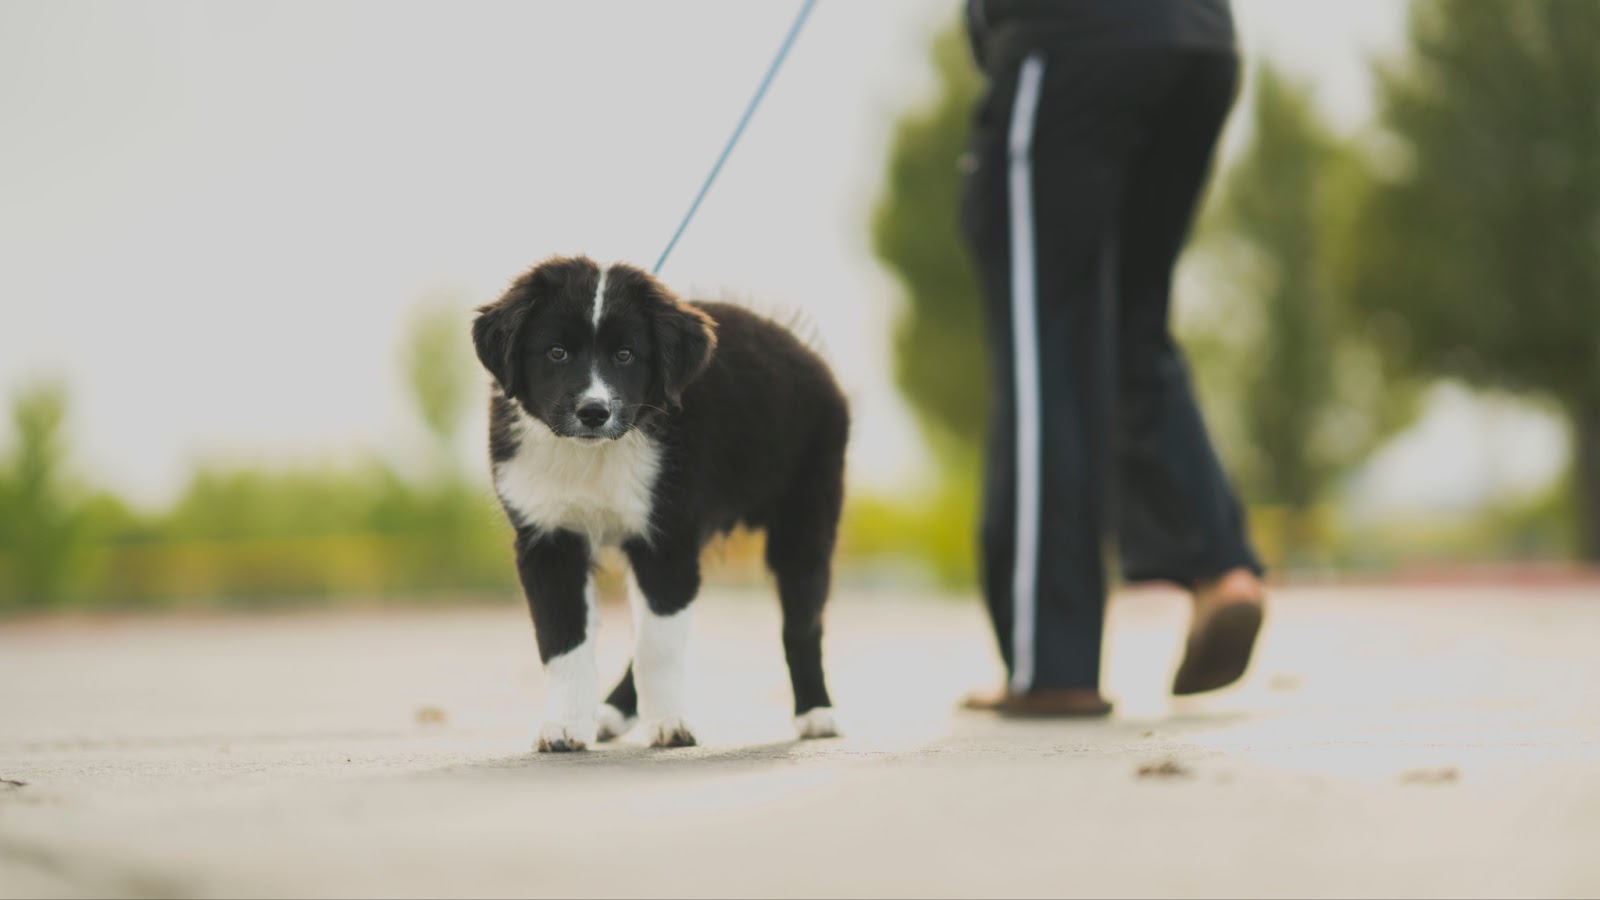 professional dog walker walking a black and white puppy